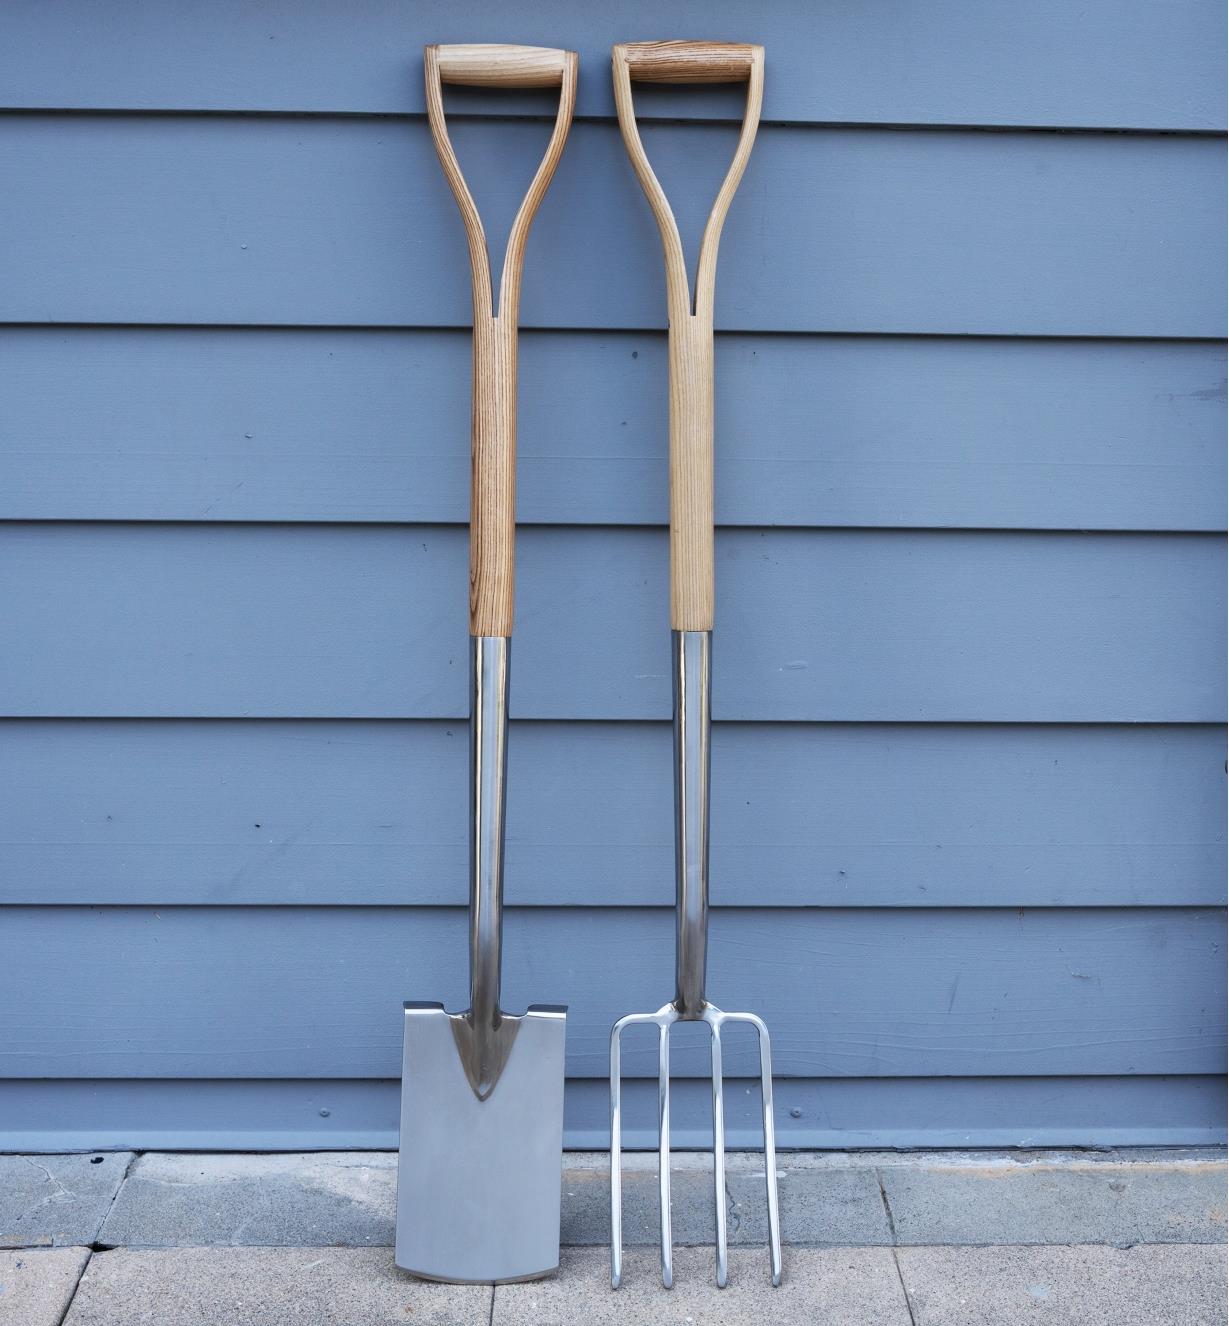 The border spade and border fork side by side leaning against a wall